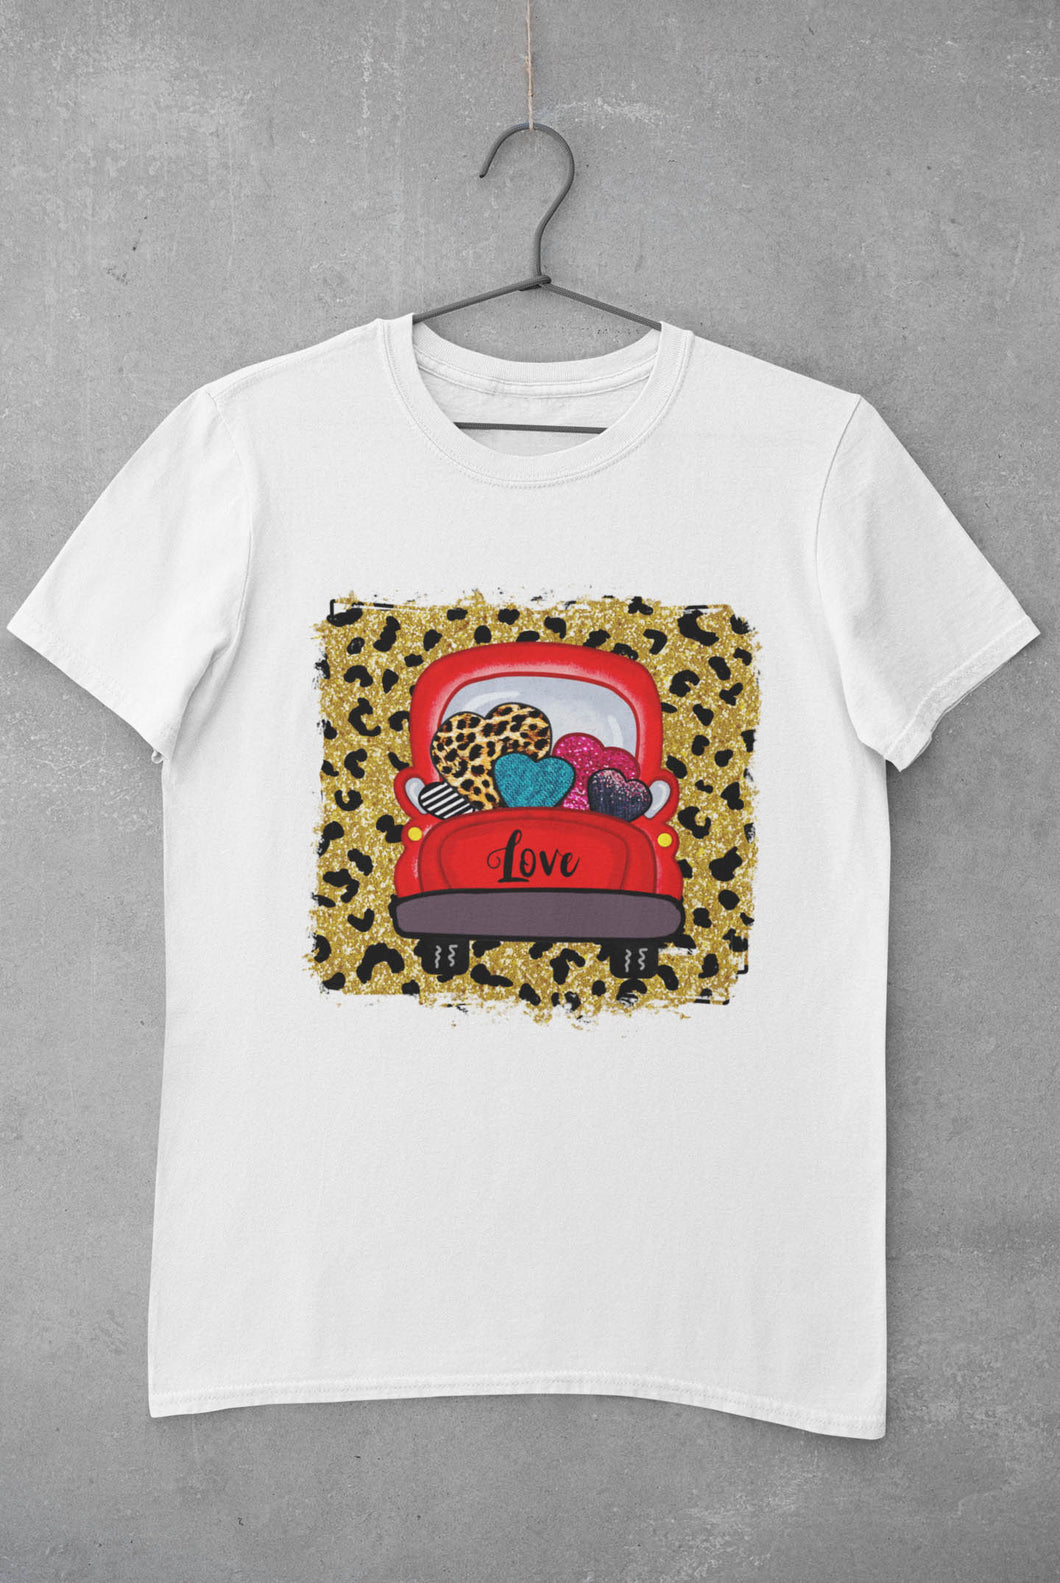 Valentine hearts t-shirt with truck - Hearts and truck t-shirt